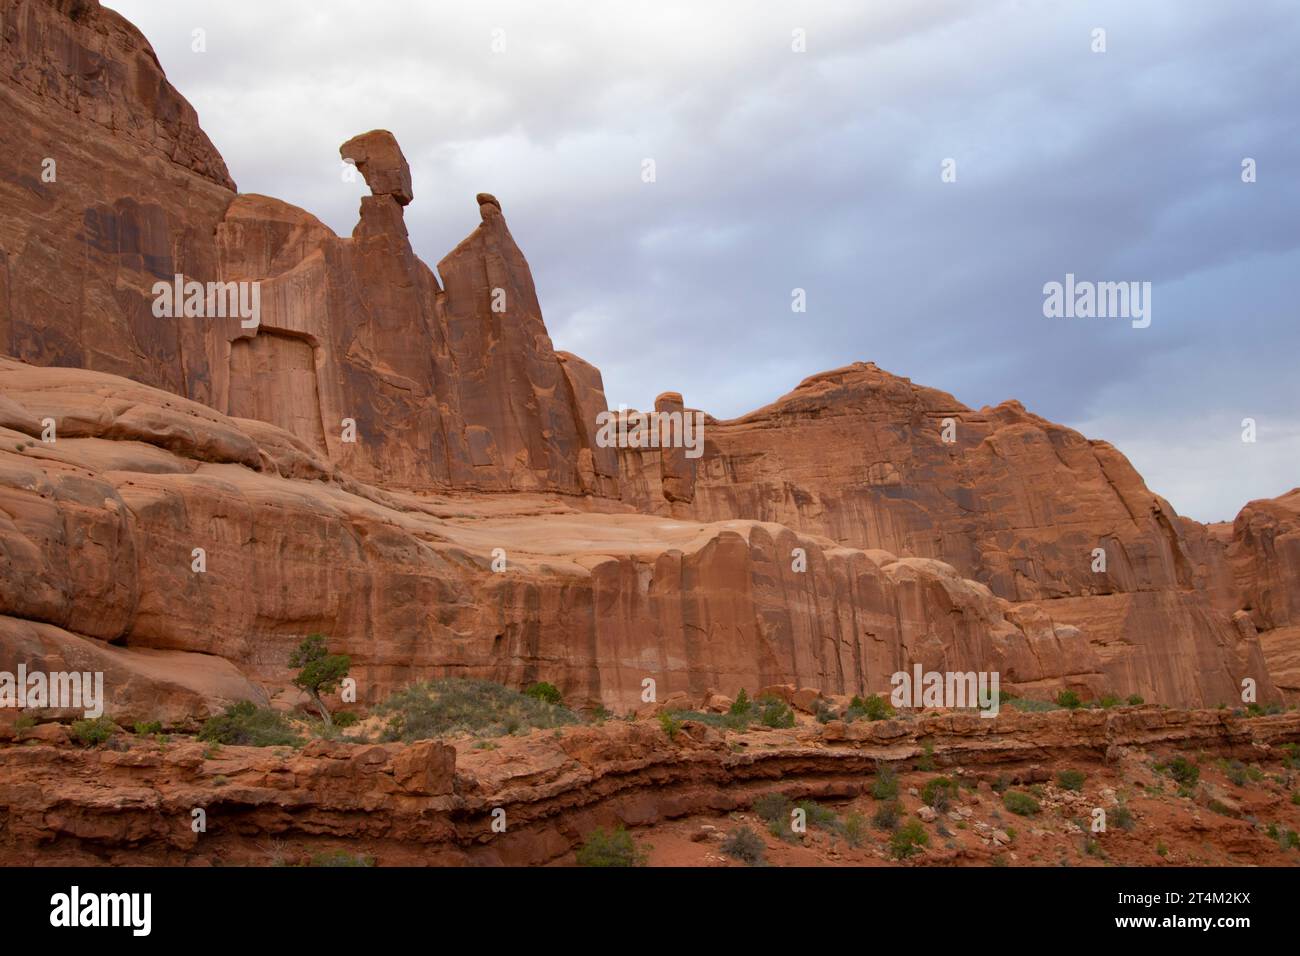 Queen Nefertiti Rock on the Park Avenue Trail in the Courthouse Towers area of Arches National Park, Moab, Utah, USA Stock Photo